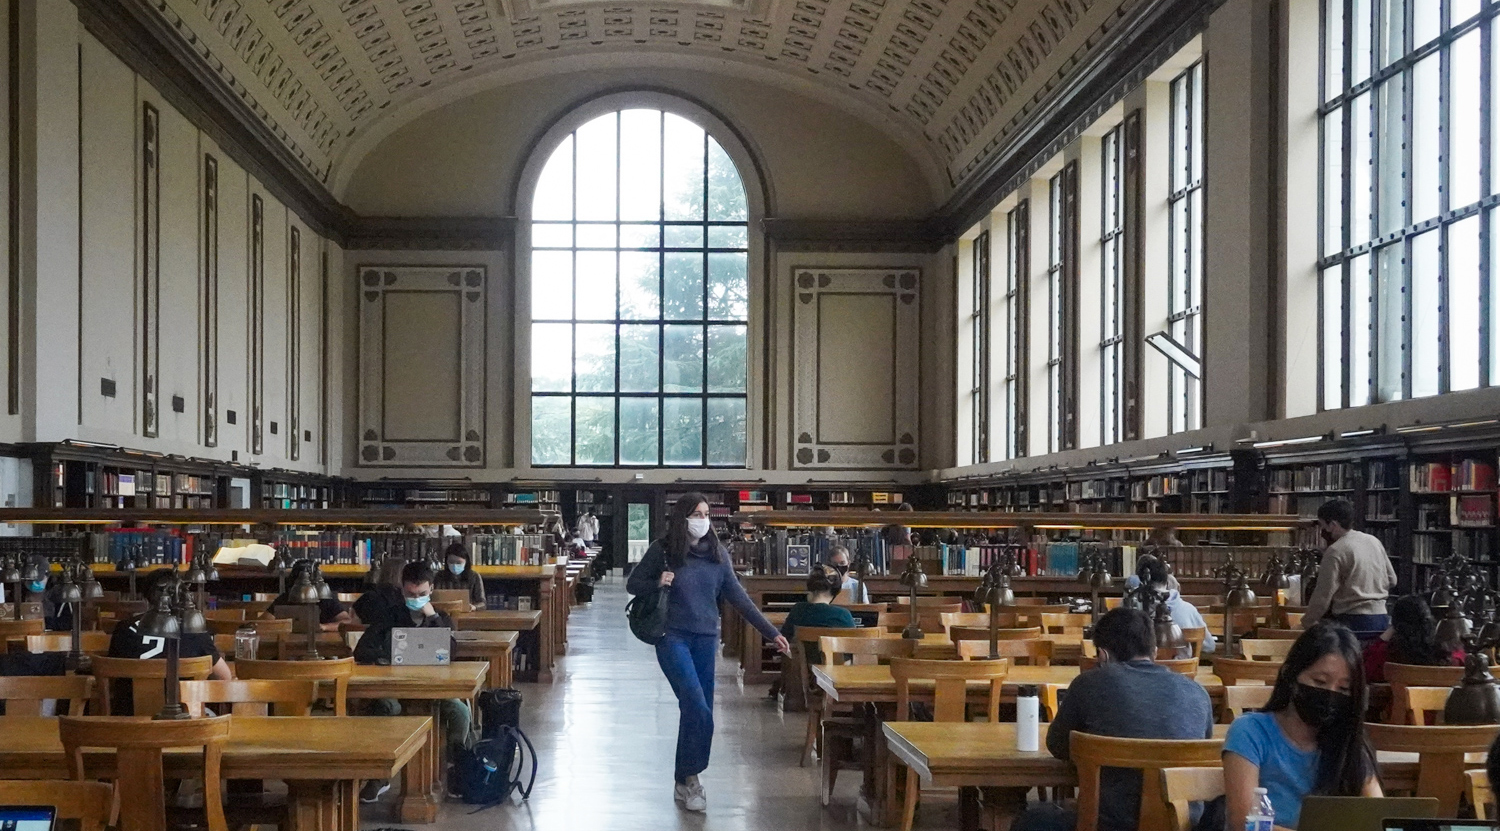 Doe Library's North Reading Room